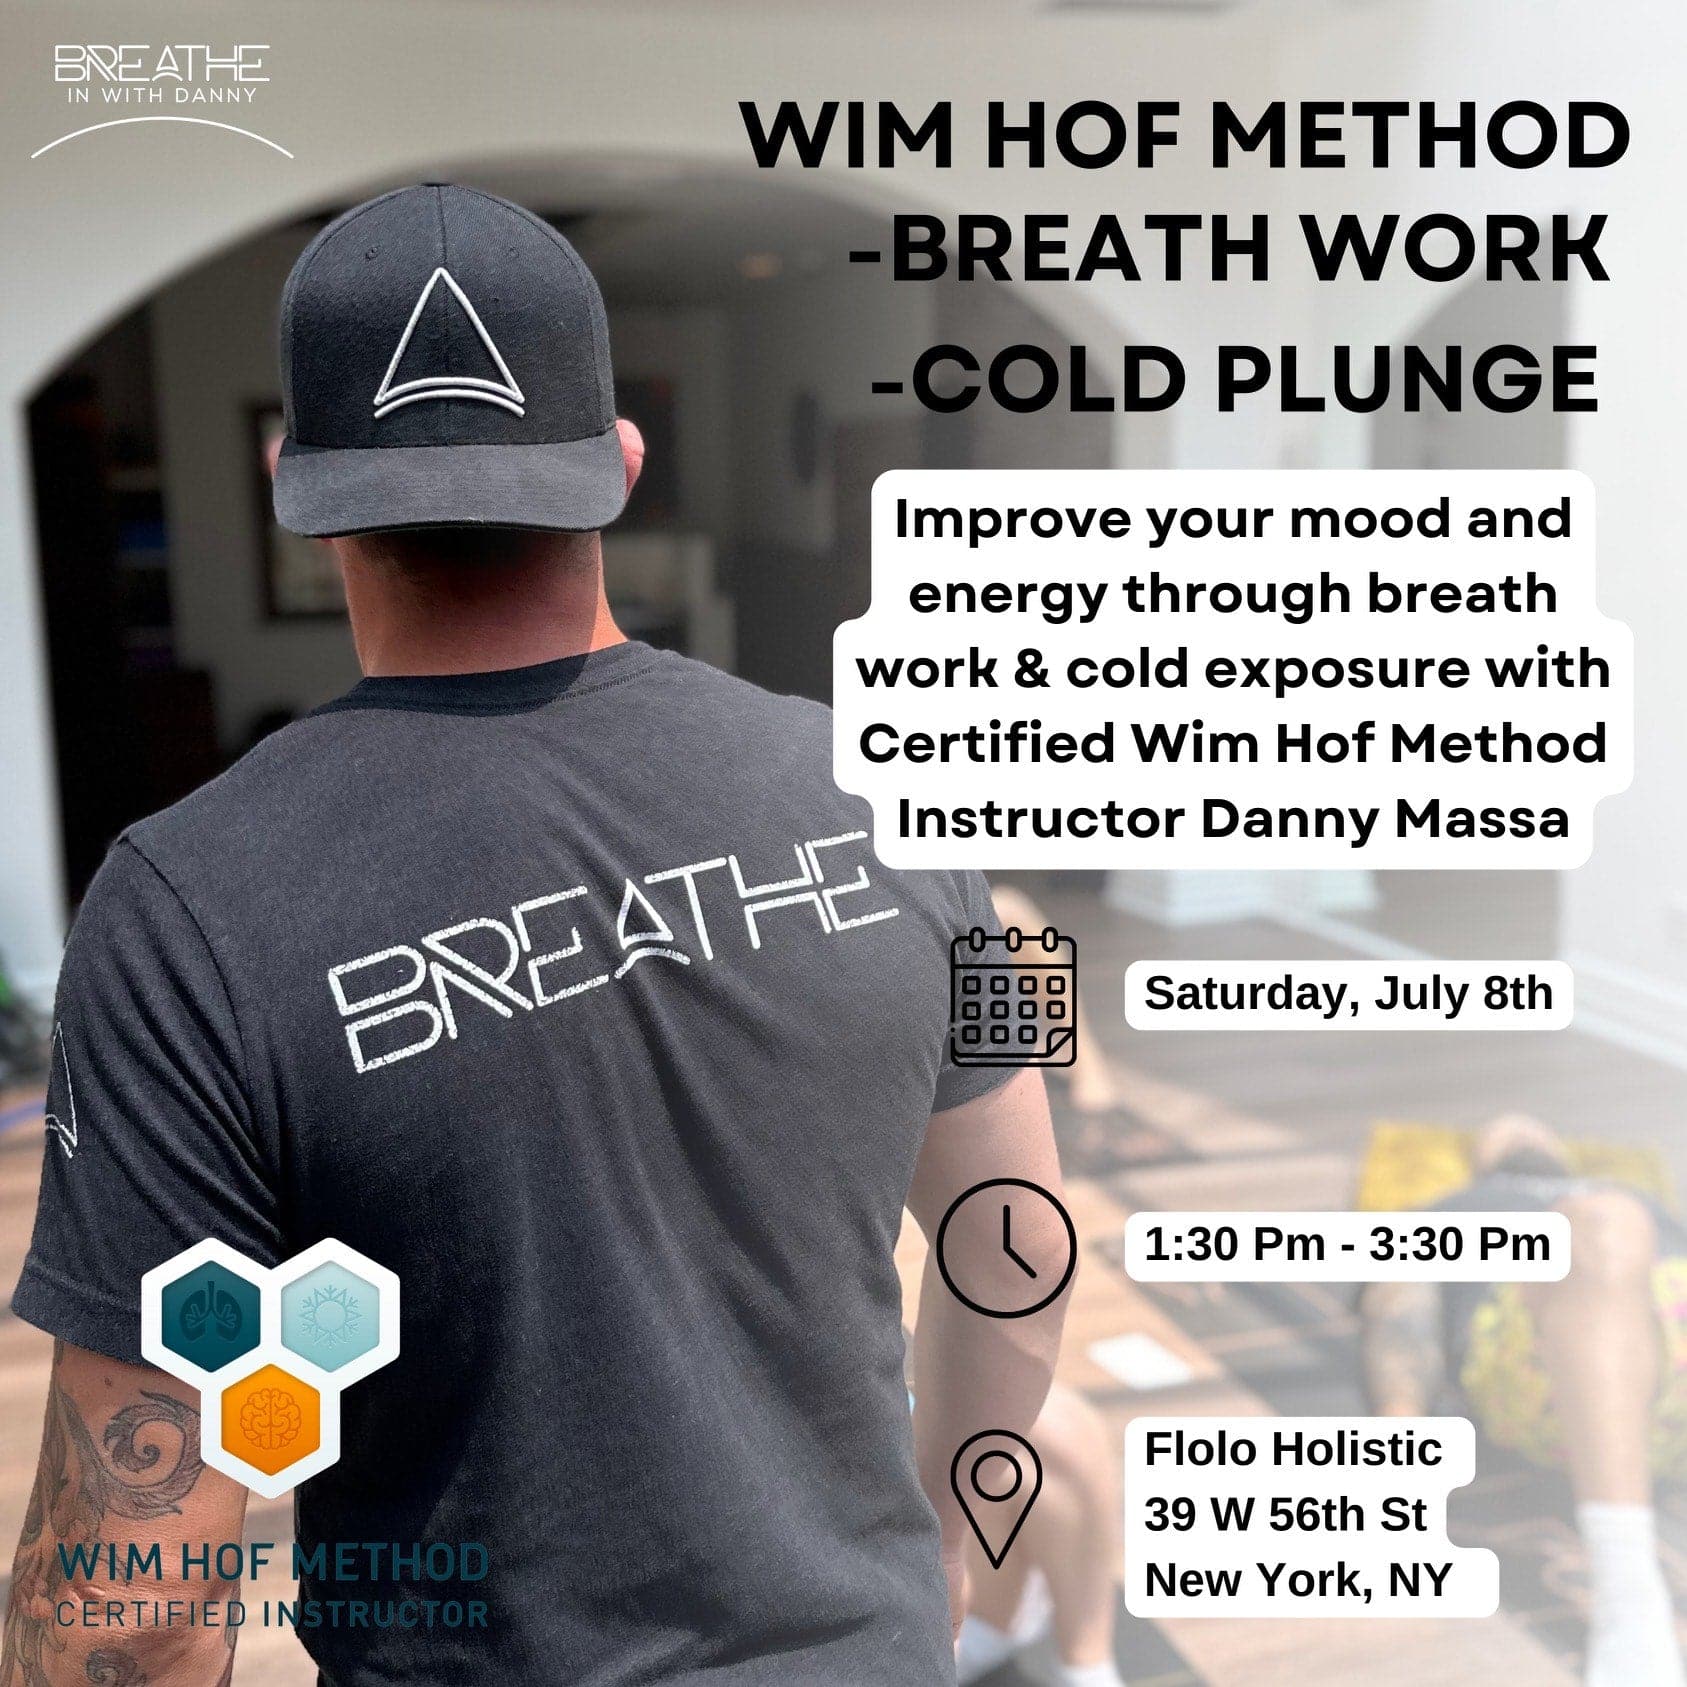 Breathe In With Danny - A Wim Hof Event